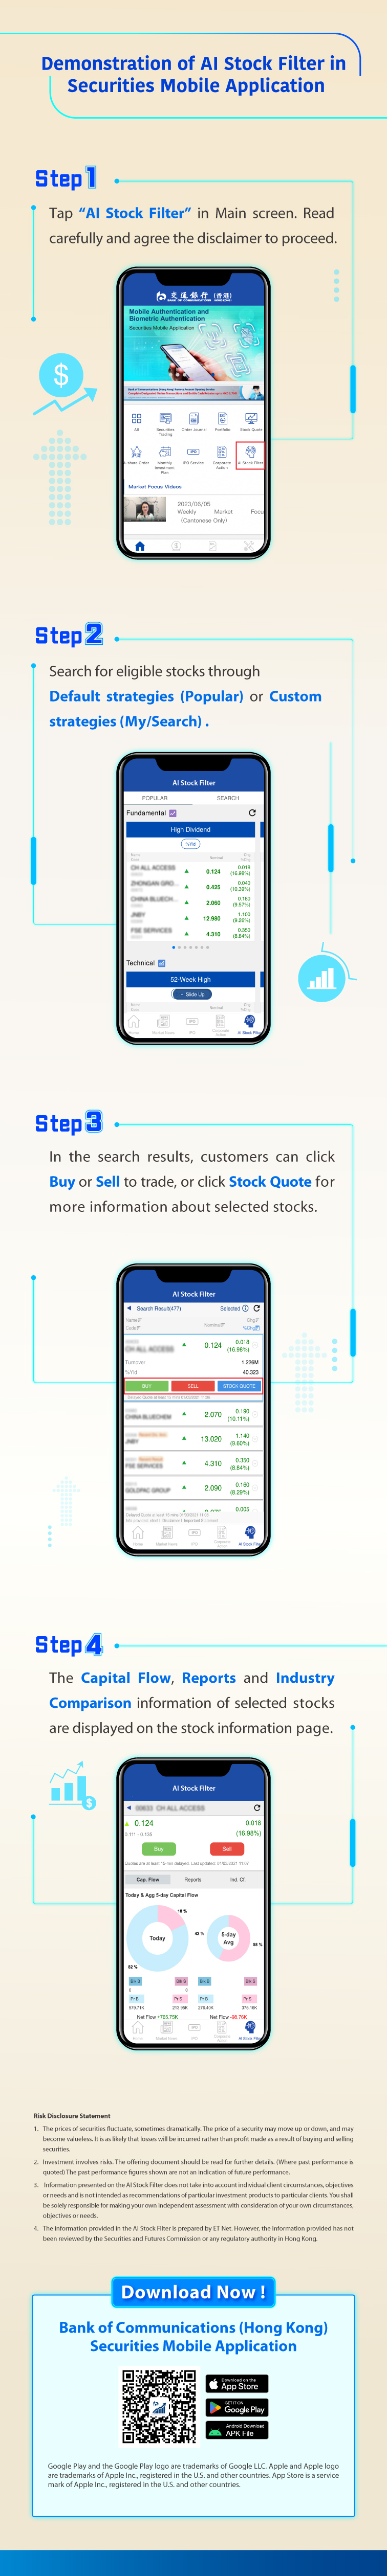 demonstration of ai stock filter in securities mobile application step 1 - tap “ai stock filter” in main screen. read carefully and agree the disclaimer to proceed. step 2 - search for eligible stocks throughdefault strategies (popular) or custom strategies (my/search) . step 3 - in the search results, customers can click buy or sell to trade, or click stock quote for more information about selected stocks. step 4 - the capital flow, reports and industry comparison information of selected stocks are displayed on the stock information page.  risk disclosure statement 1.	the prices of securities fluctuate, sometimes dramatically. the price of a security may move up or down, and may become valueless. it is as likely that losses will be incurred rather than profit made as a result of buying and selling securities. 2.	investment involves risks. the offering document should be read for further details. (where past performance is quoted) the past performance figures shown are not an indication of future performance. 3.	information presented on the ai stock filter does not take into account individual client circumstances, objectives or needs and is not intended as recommendations of particular investment products to particular clients. you shall be solely responsible for making their own independent assessment with consideration of their own circumstances,objectives or needs. 4.	the information provided in the ai stock filter is prepared by et net. however, the information provided has not been reviewed by the securities and futures commission or any regulatory authority in hong kong.  download now ! bocom(hk) securities mobile app apple and the apple logo are trademarks of apple inc., registered in the u.s. and other countries. app store is a service mark of apple inc.. android, google play, and the google play logo are trademarks of google inc..